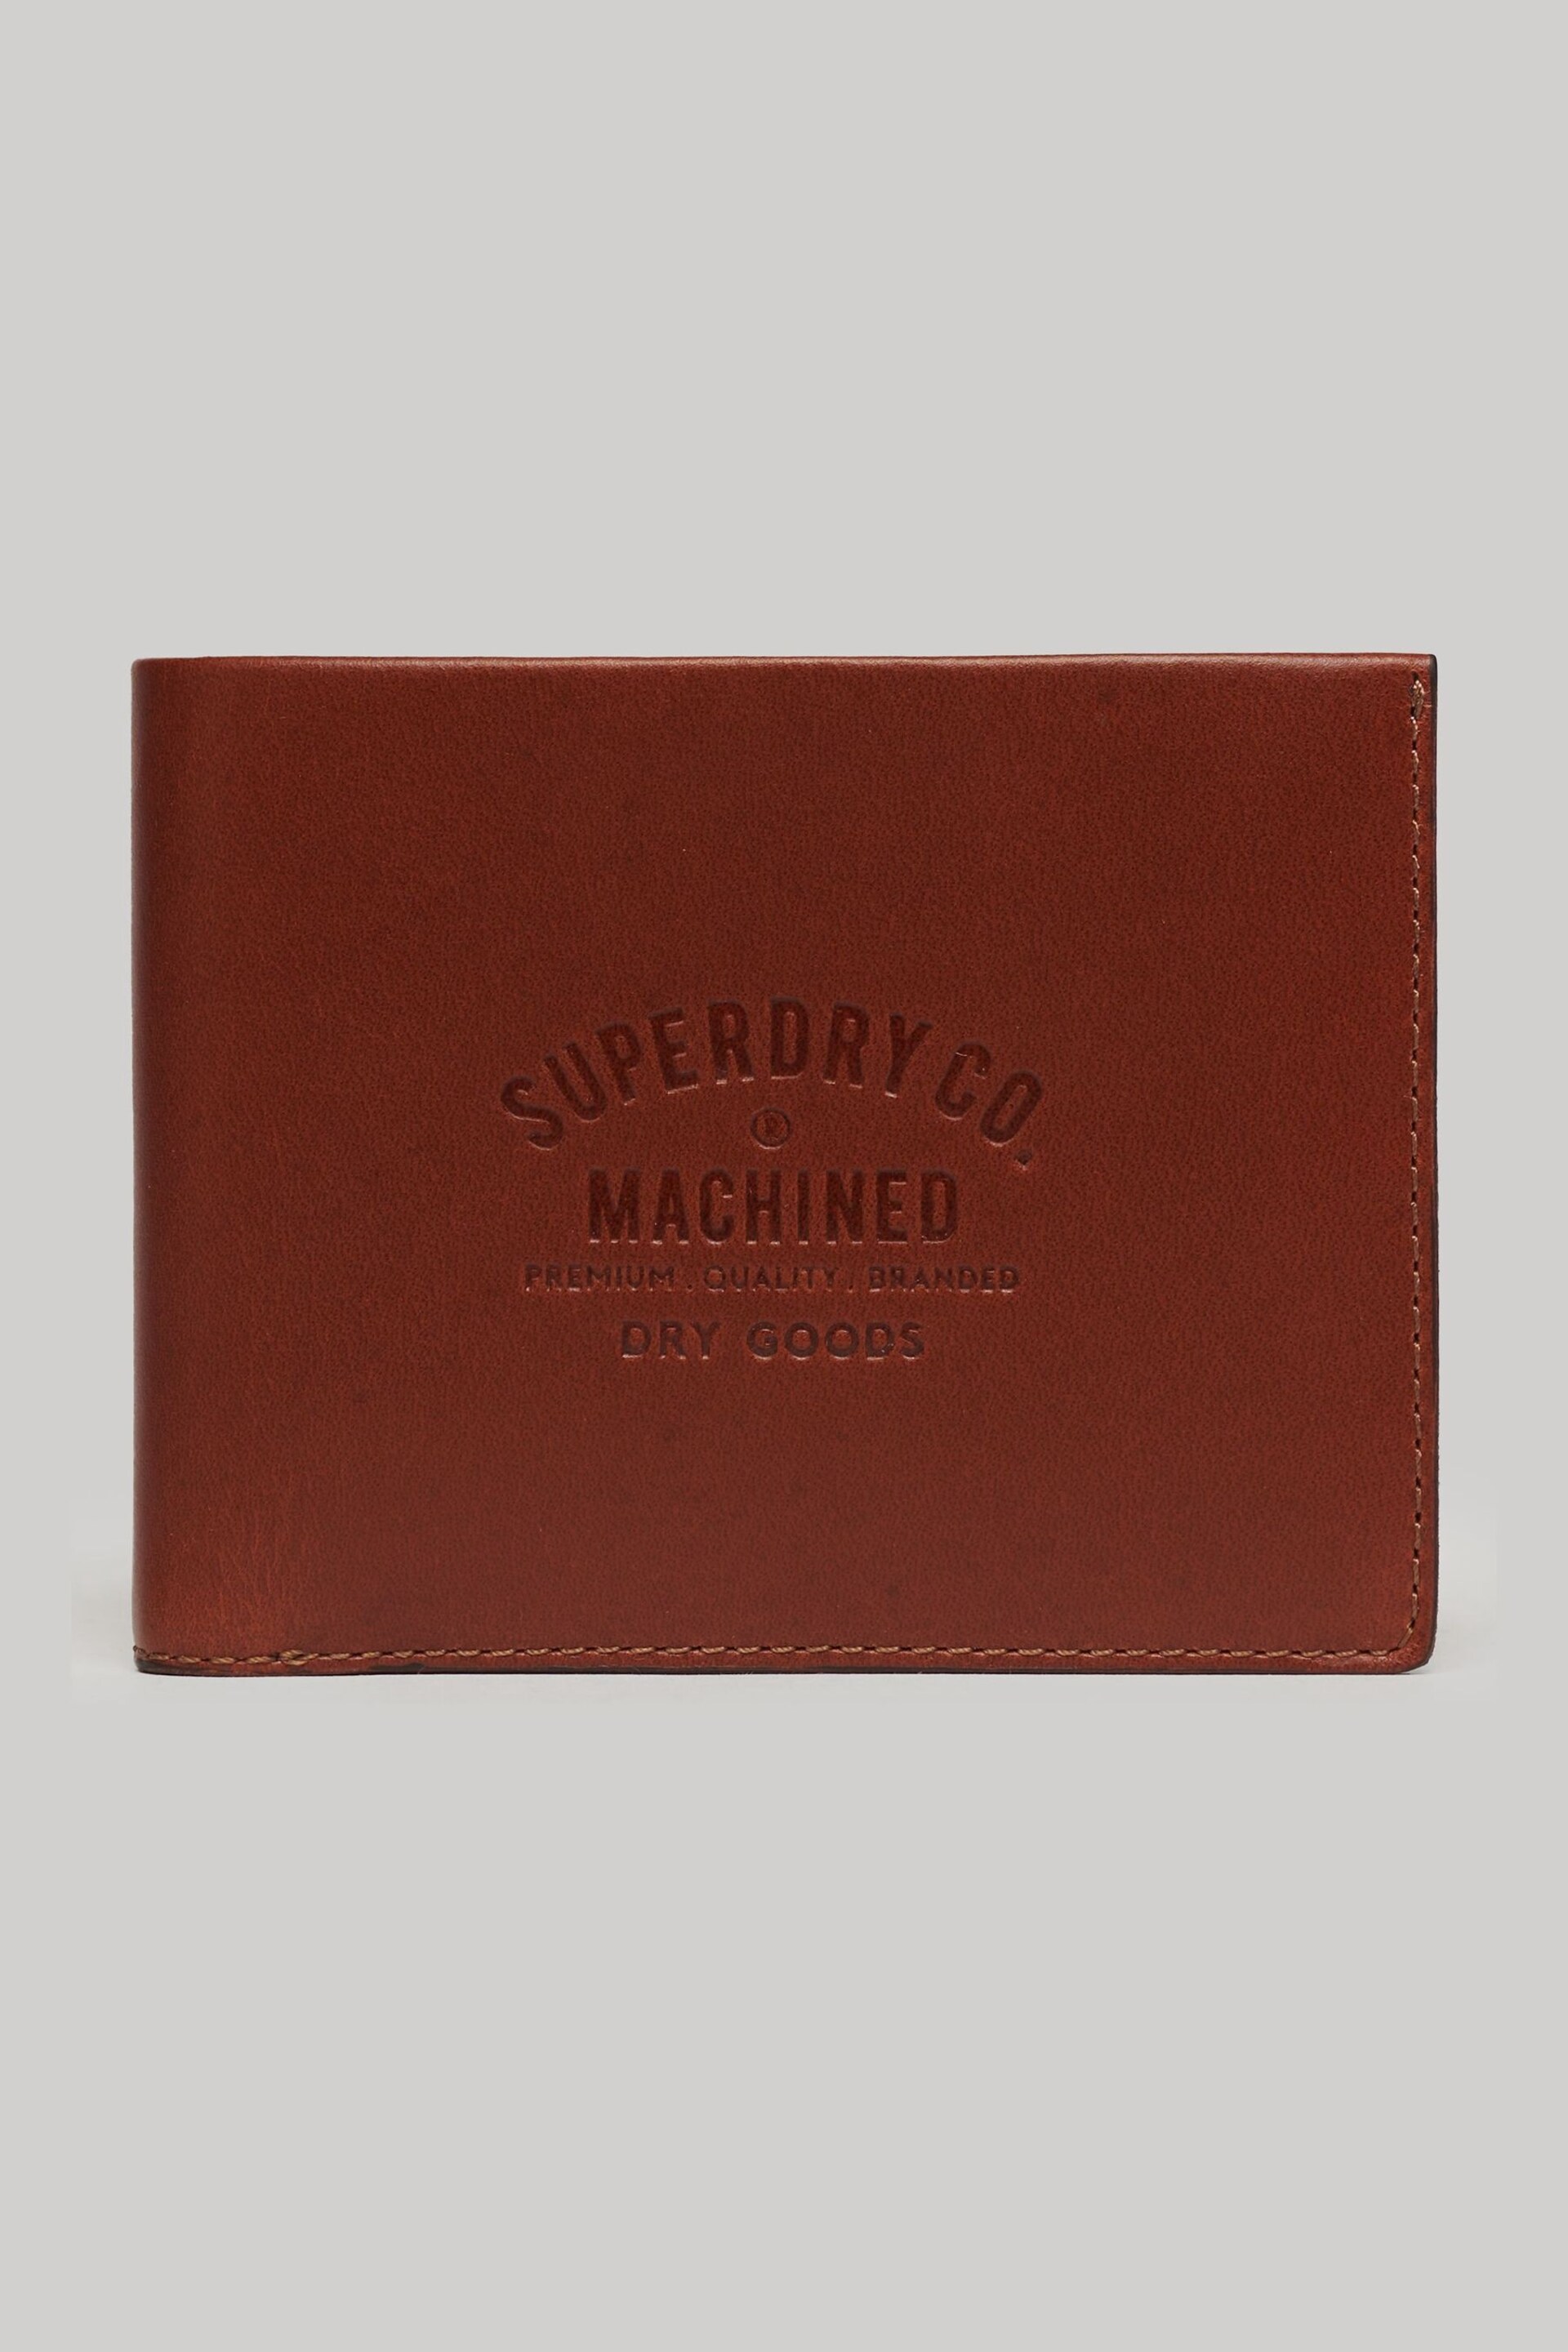 Superdry Brown Leather Wallet In Box - Image 3 of 6